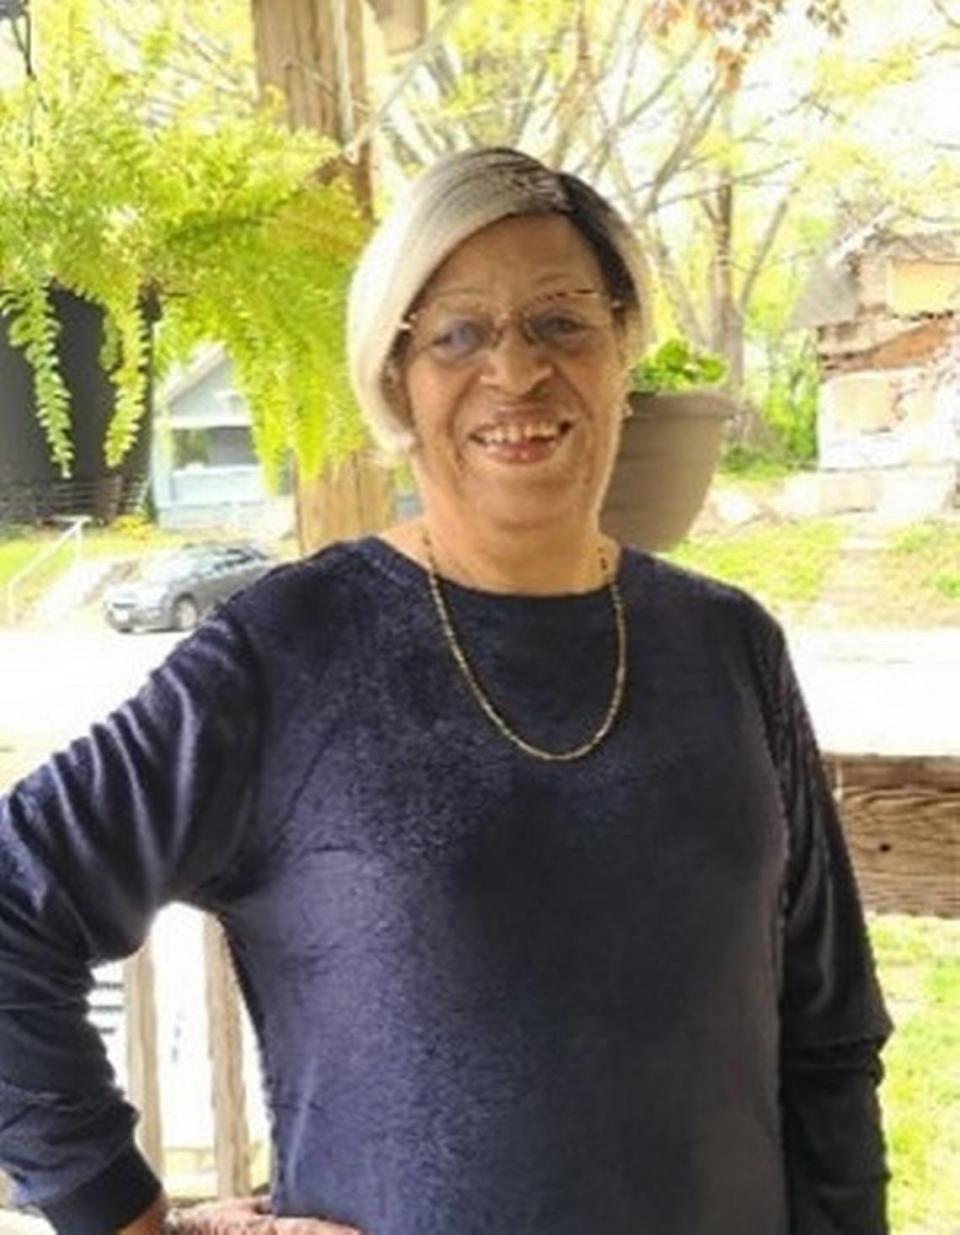 Mary Jones, mother and hospice worker, died Nov. 20. She was 77.